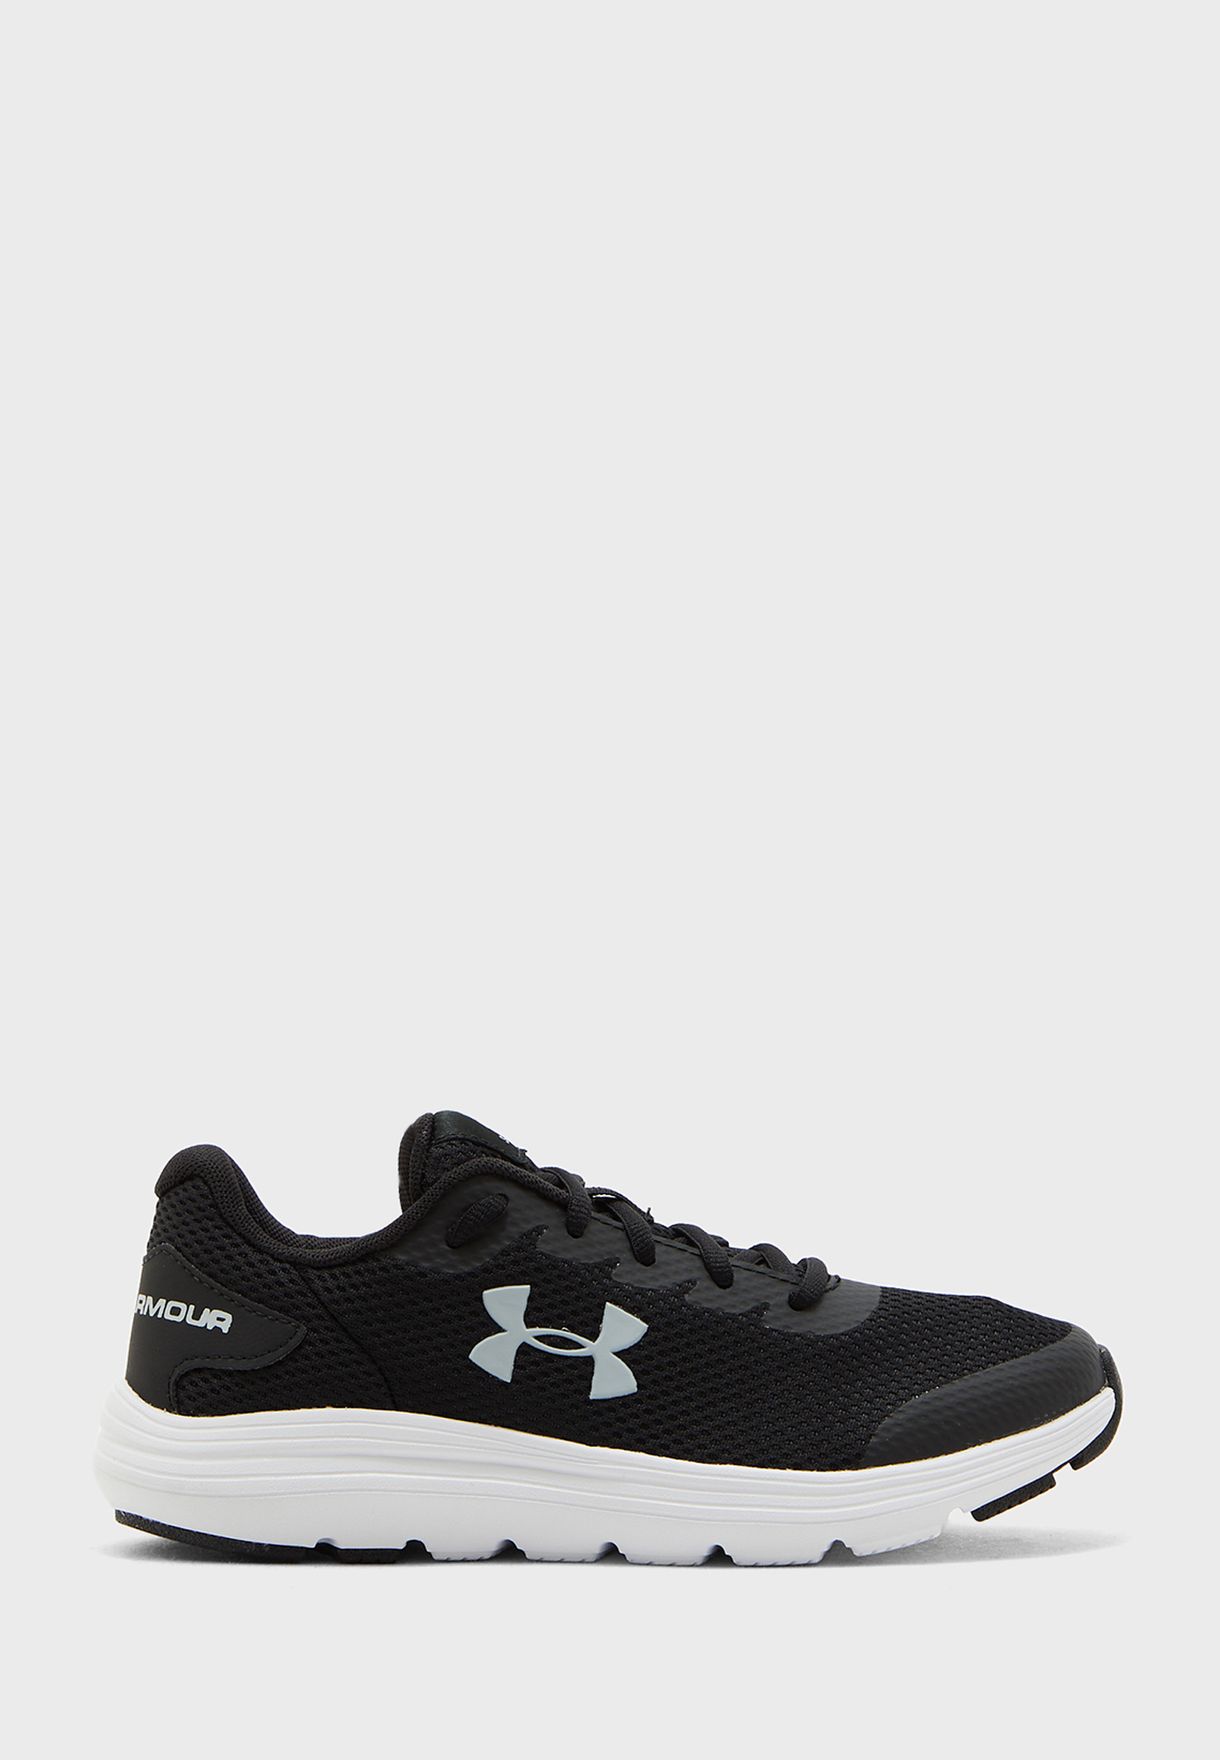 youth black under armour shoes